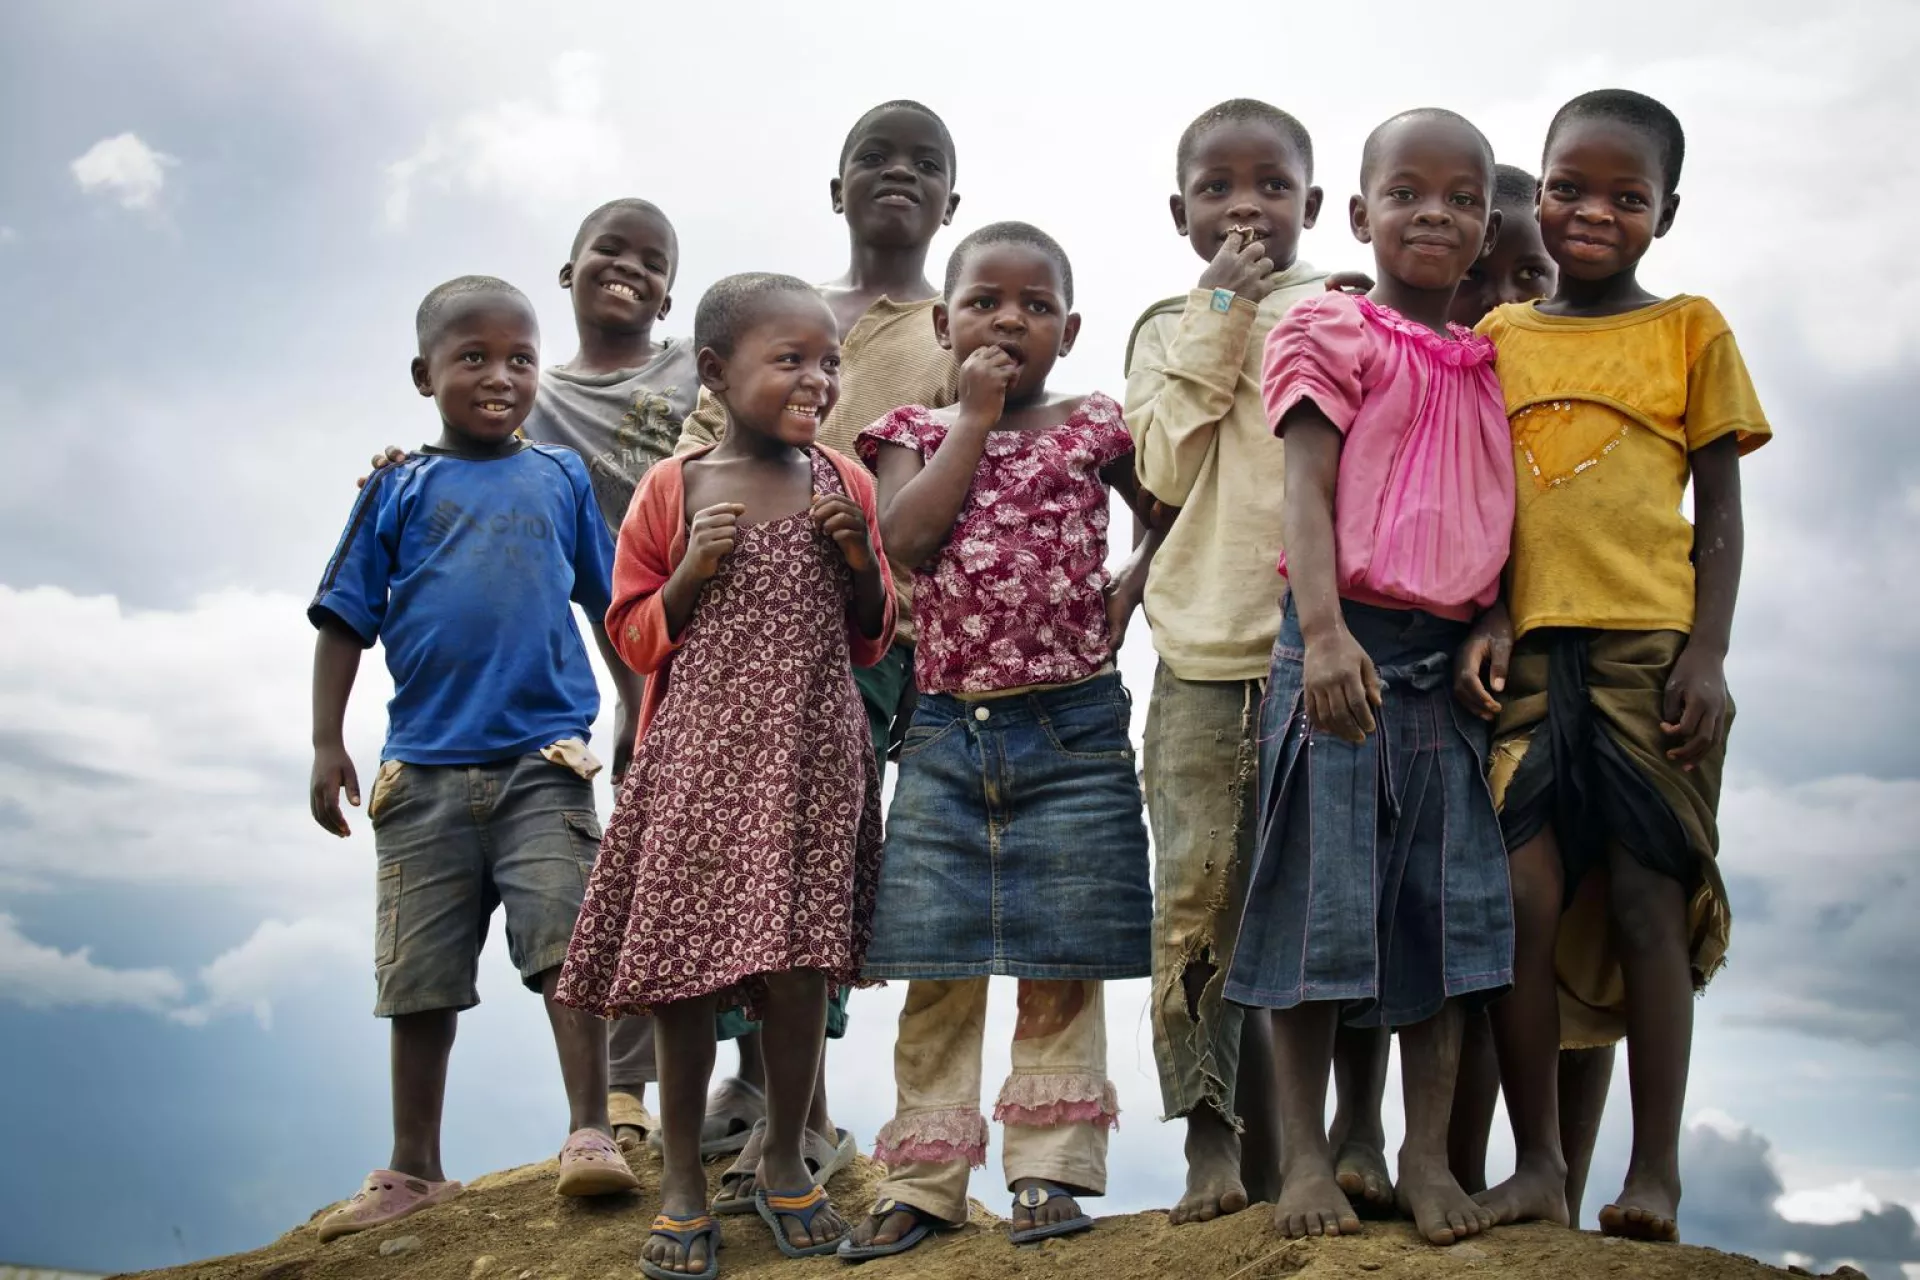 A group of young children stand on a hill and pose for a photograph